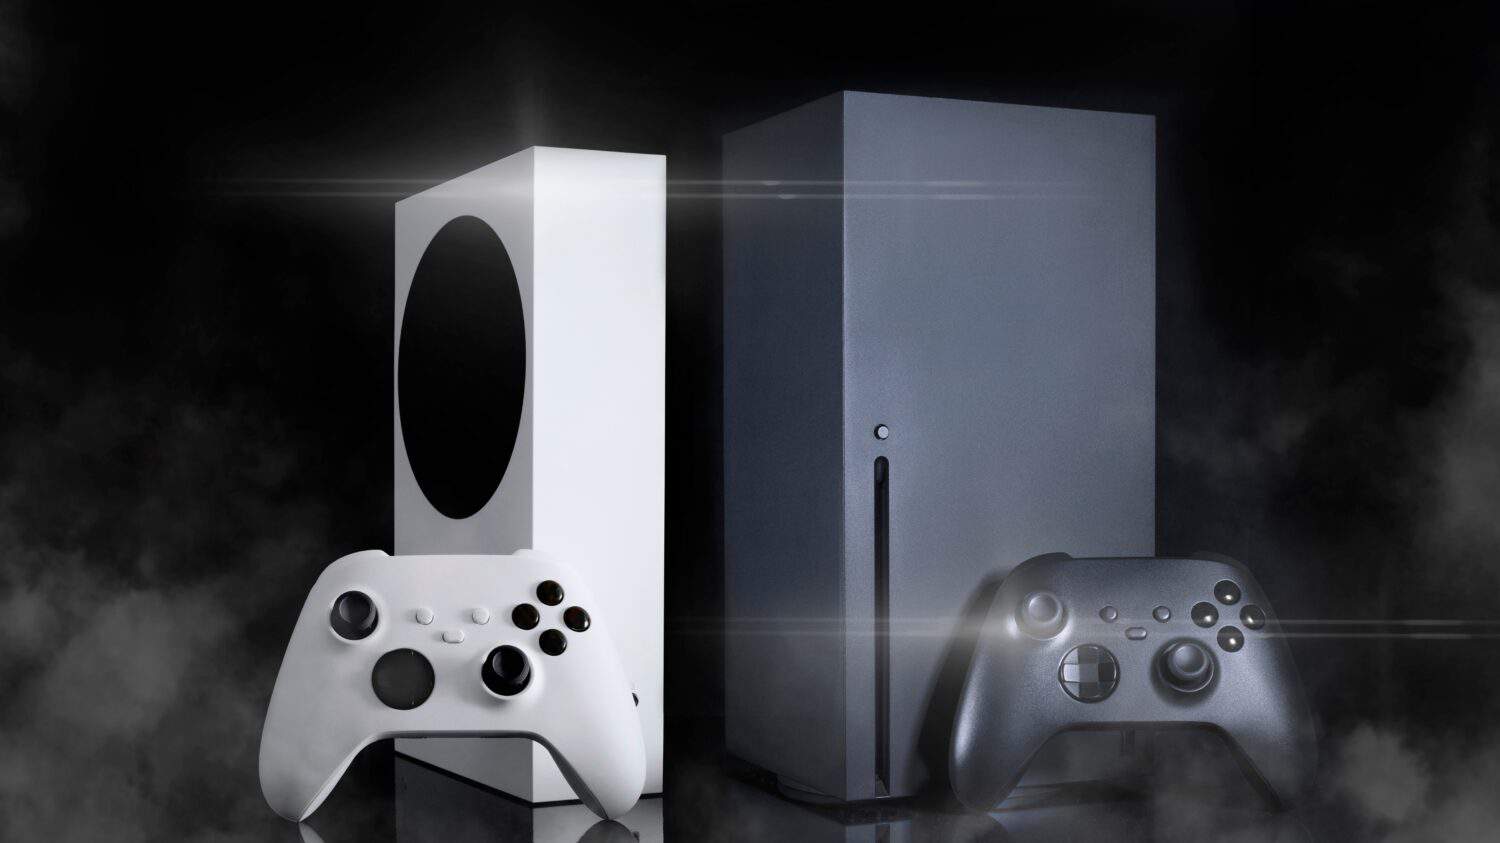 Next Generation consoles with fog